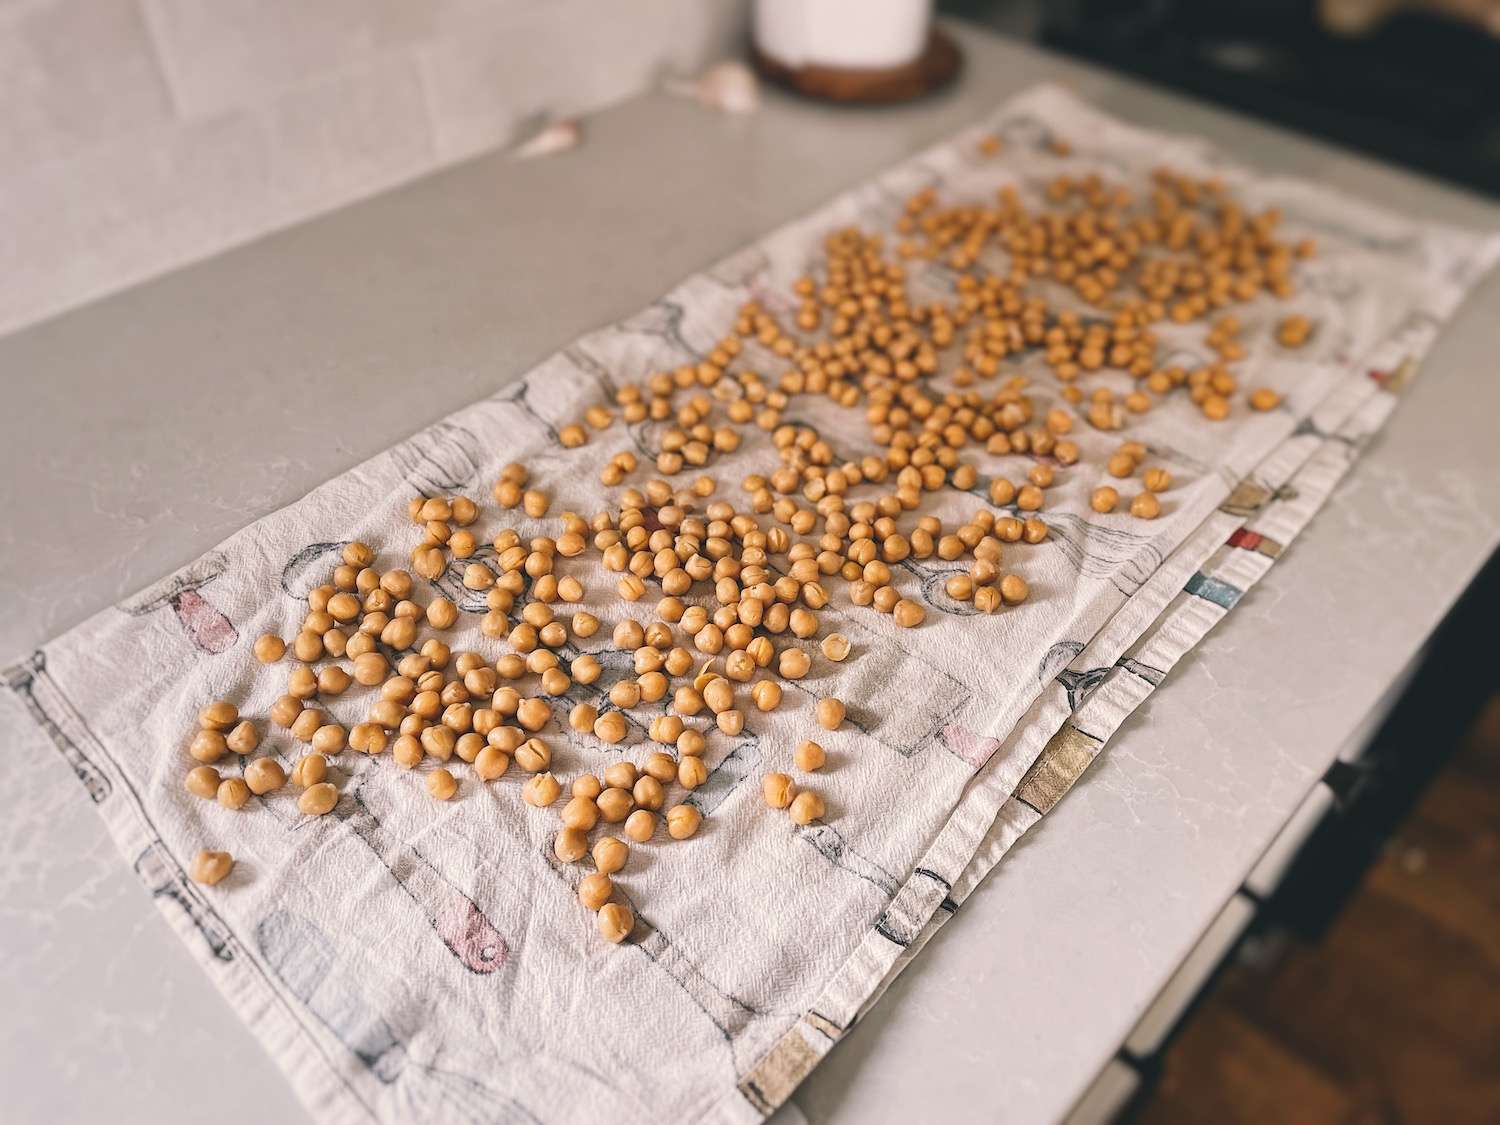 Chickpeas laid out on a tea towel to dry